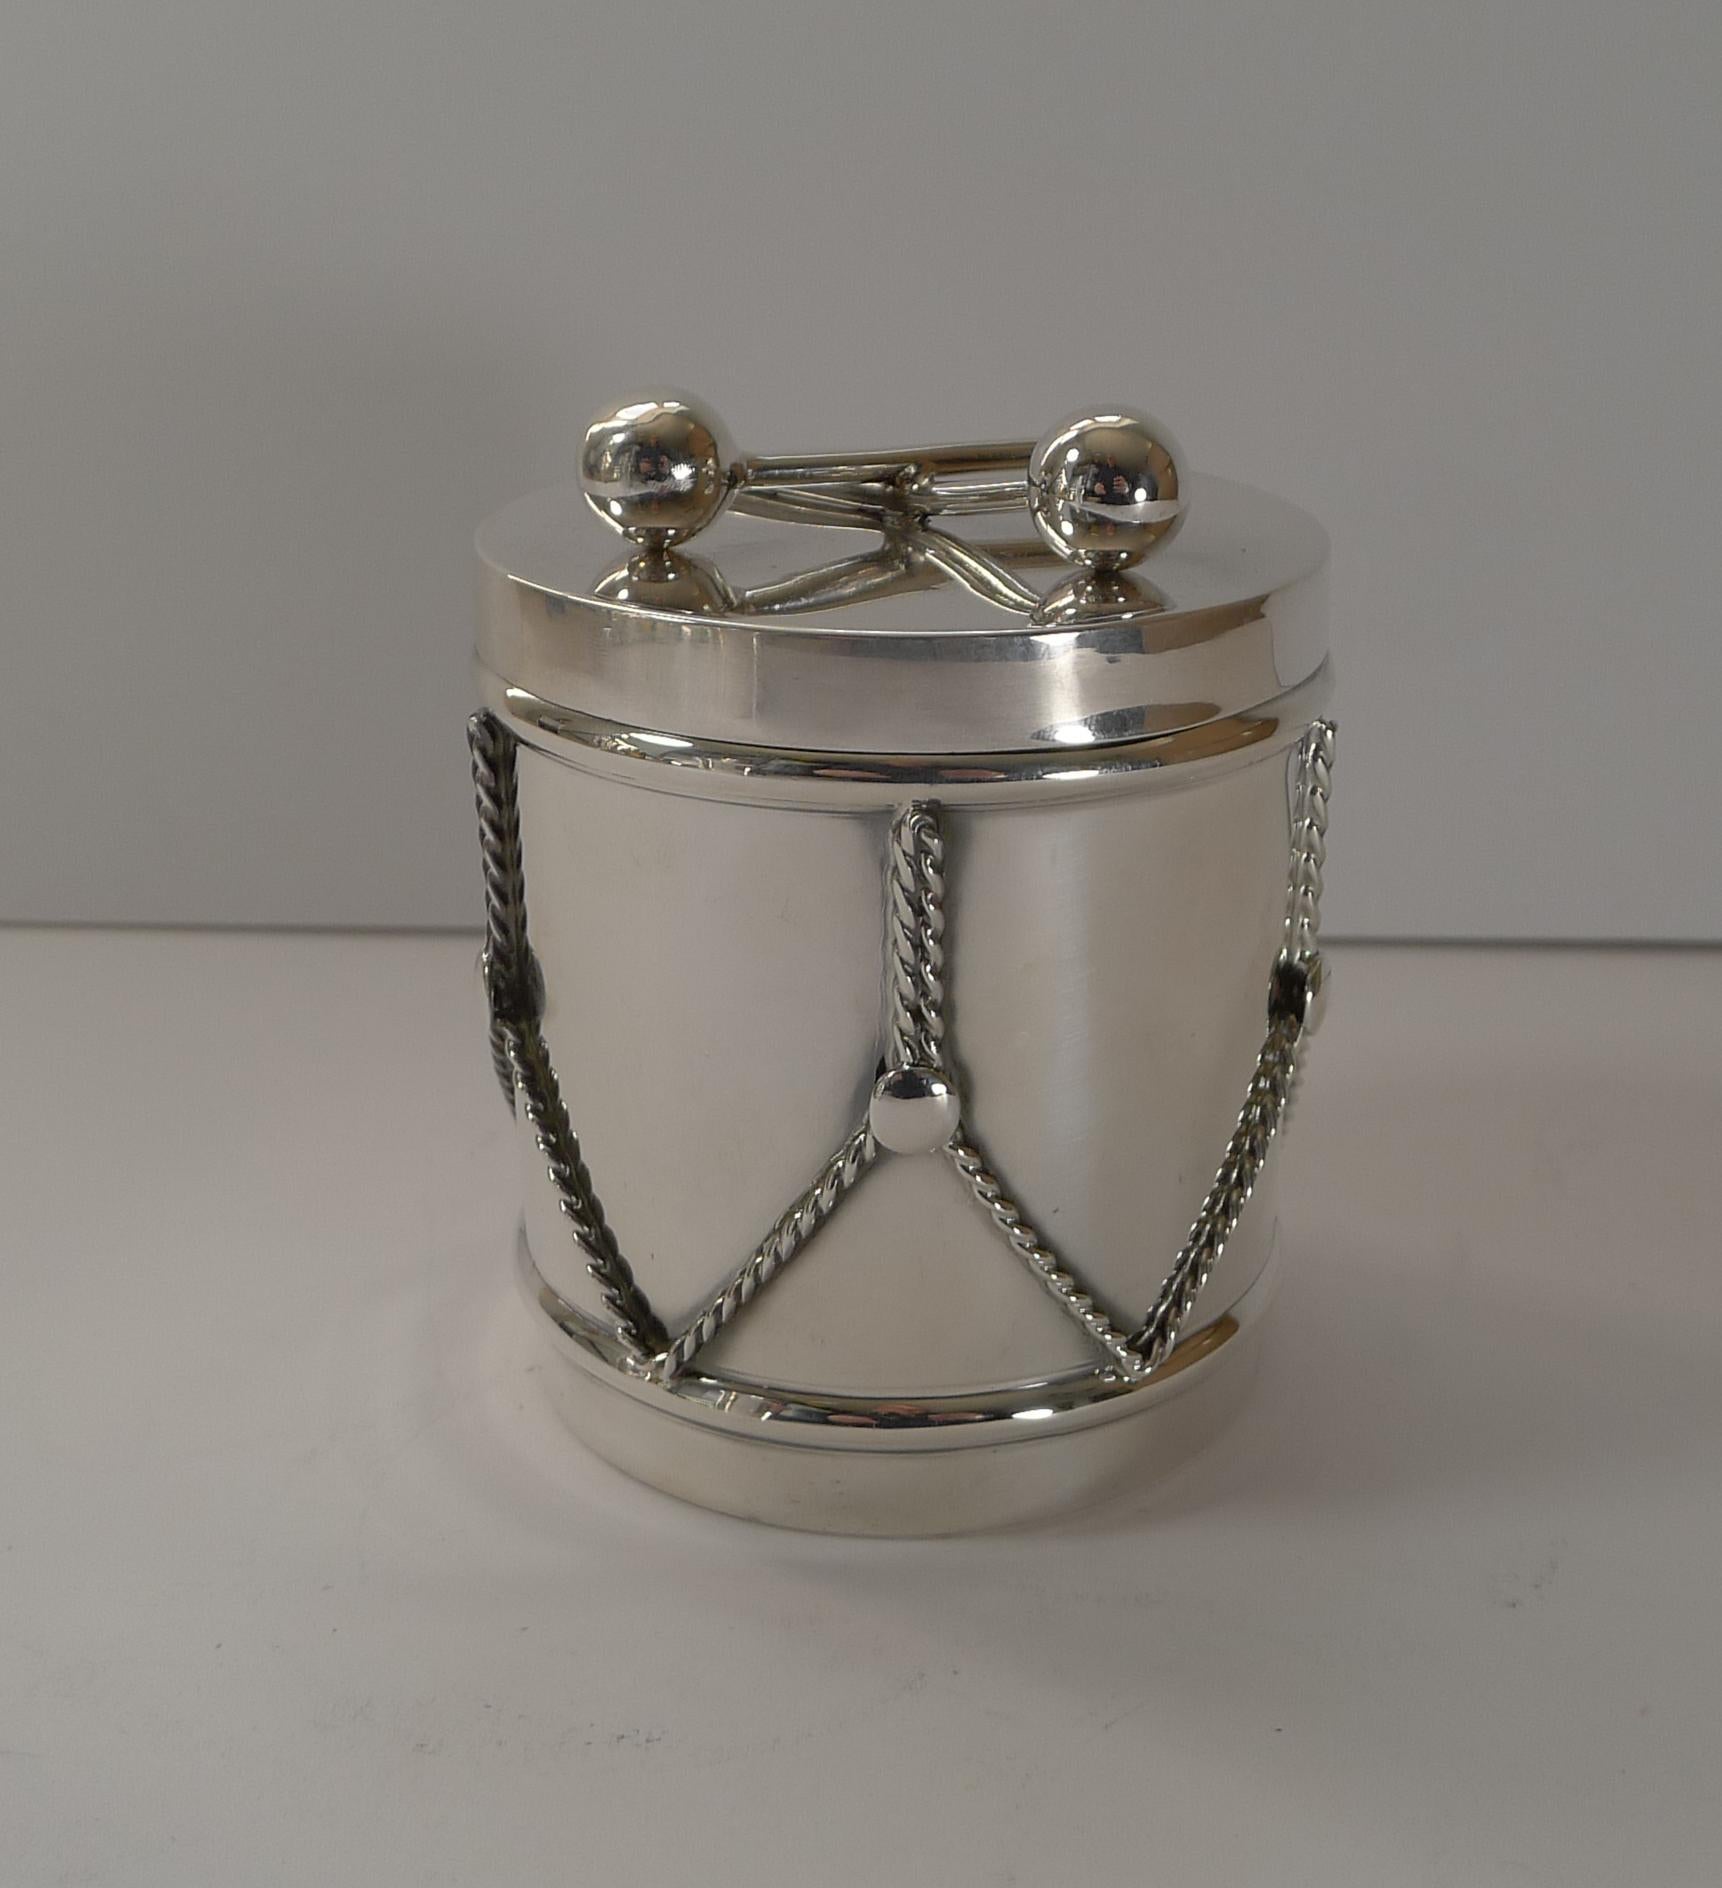 An exquisite and unusual sterling silver box in the from of a drum with a glass liner inside.

Marked on the underside by the famous silversmith / Jeweller, Cartier and marked Sterling.

Excellent condition dating to c.1970 measuring 3 1/2